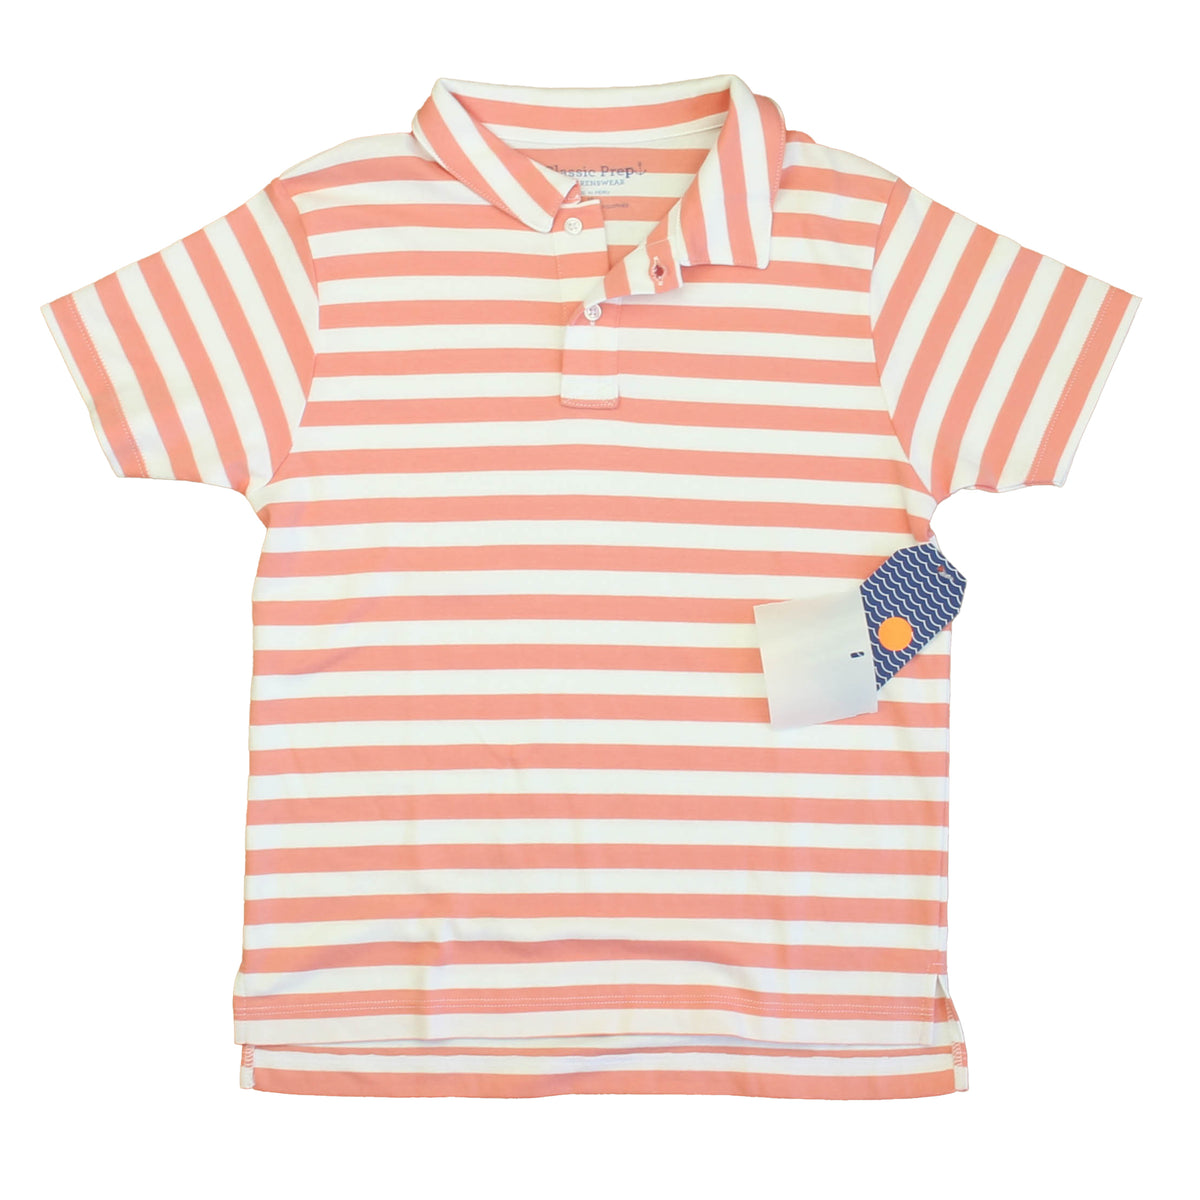 New with Tags: Pink Stripe Top size: 6-14 Years -- FINAL SALE